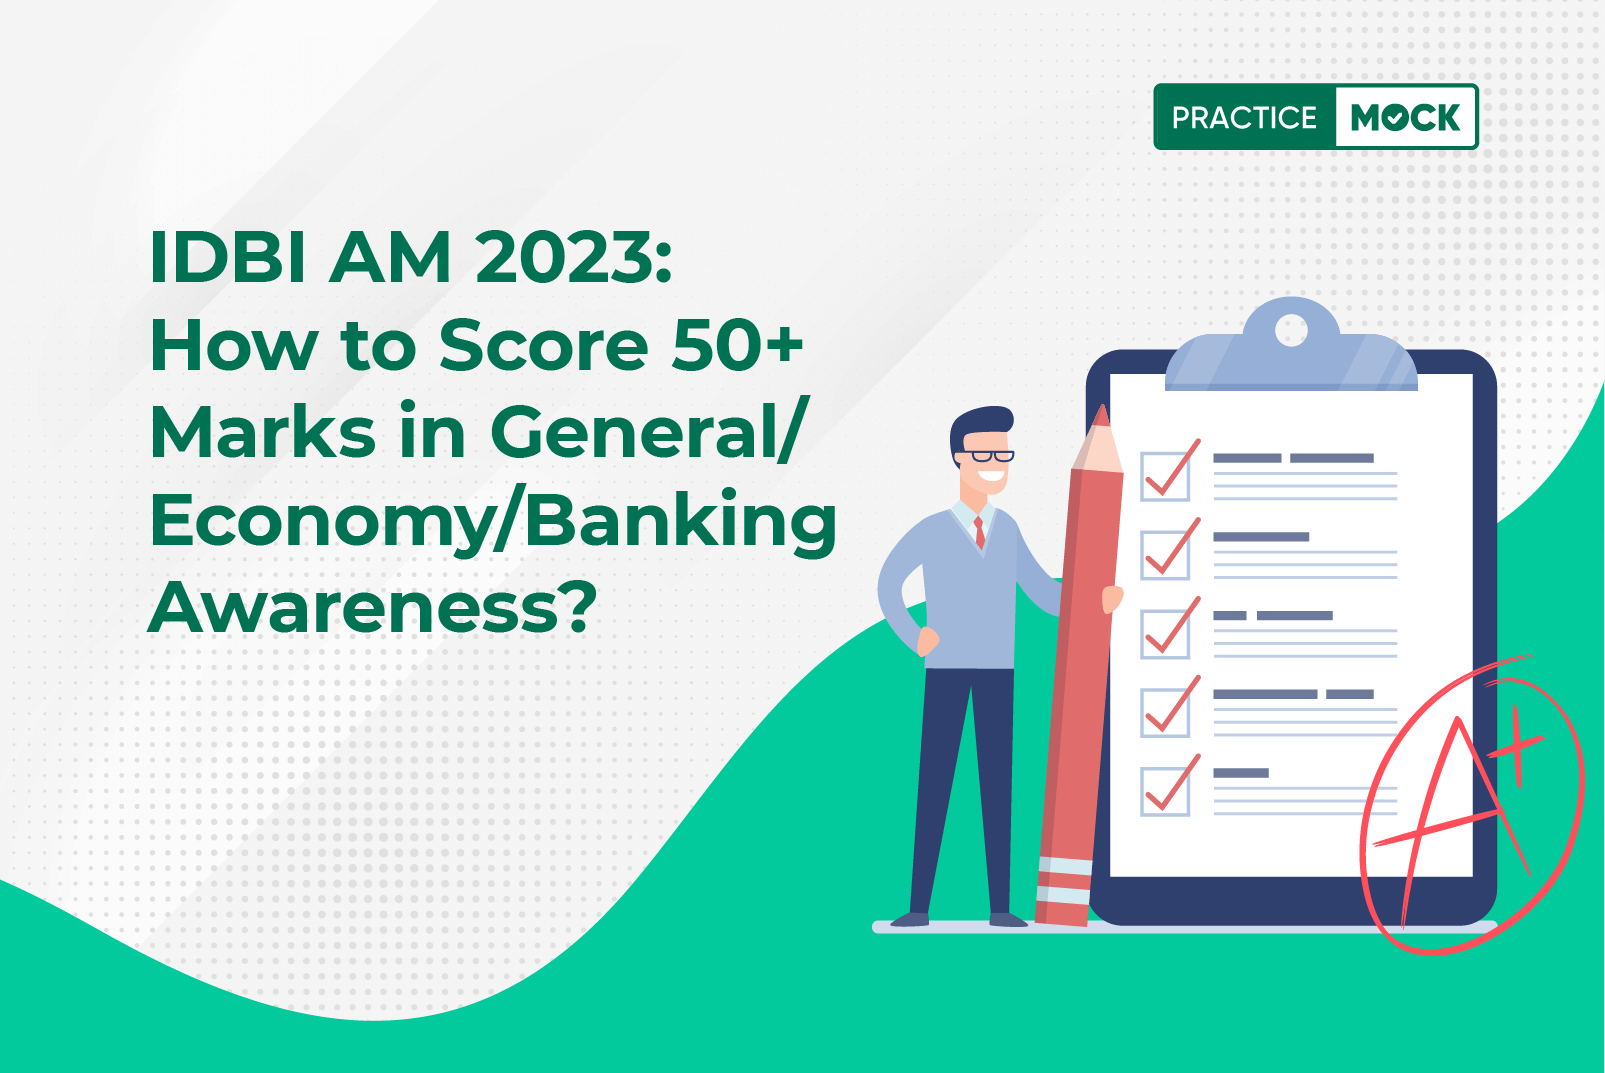 IDBI Assistant Manager 2023- How to Score 50+ Marks in General/Economy/Banking Awareness?